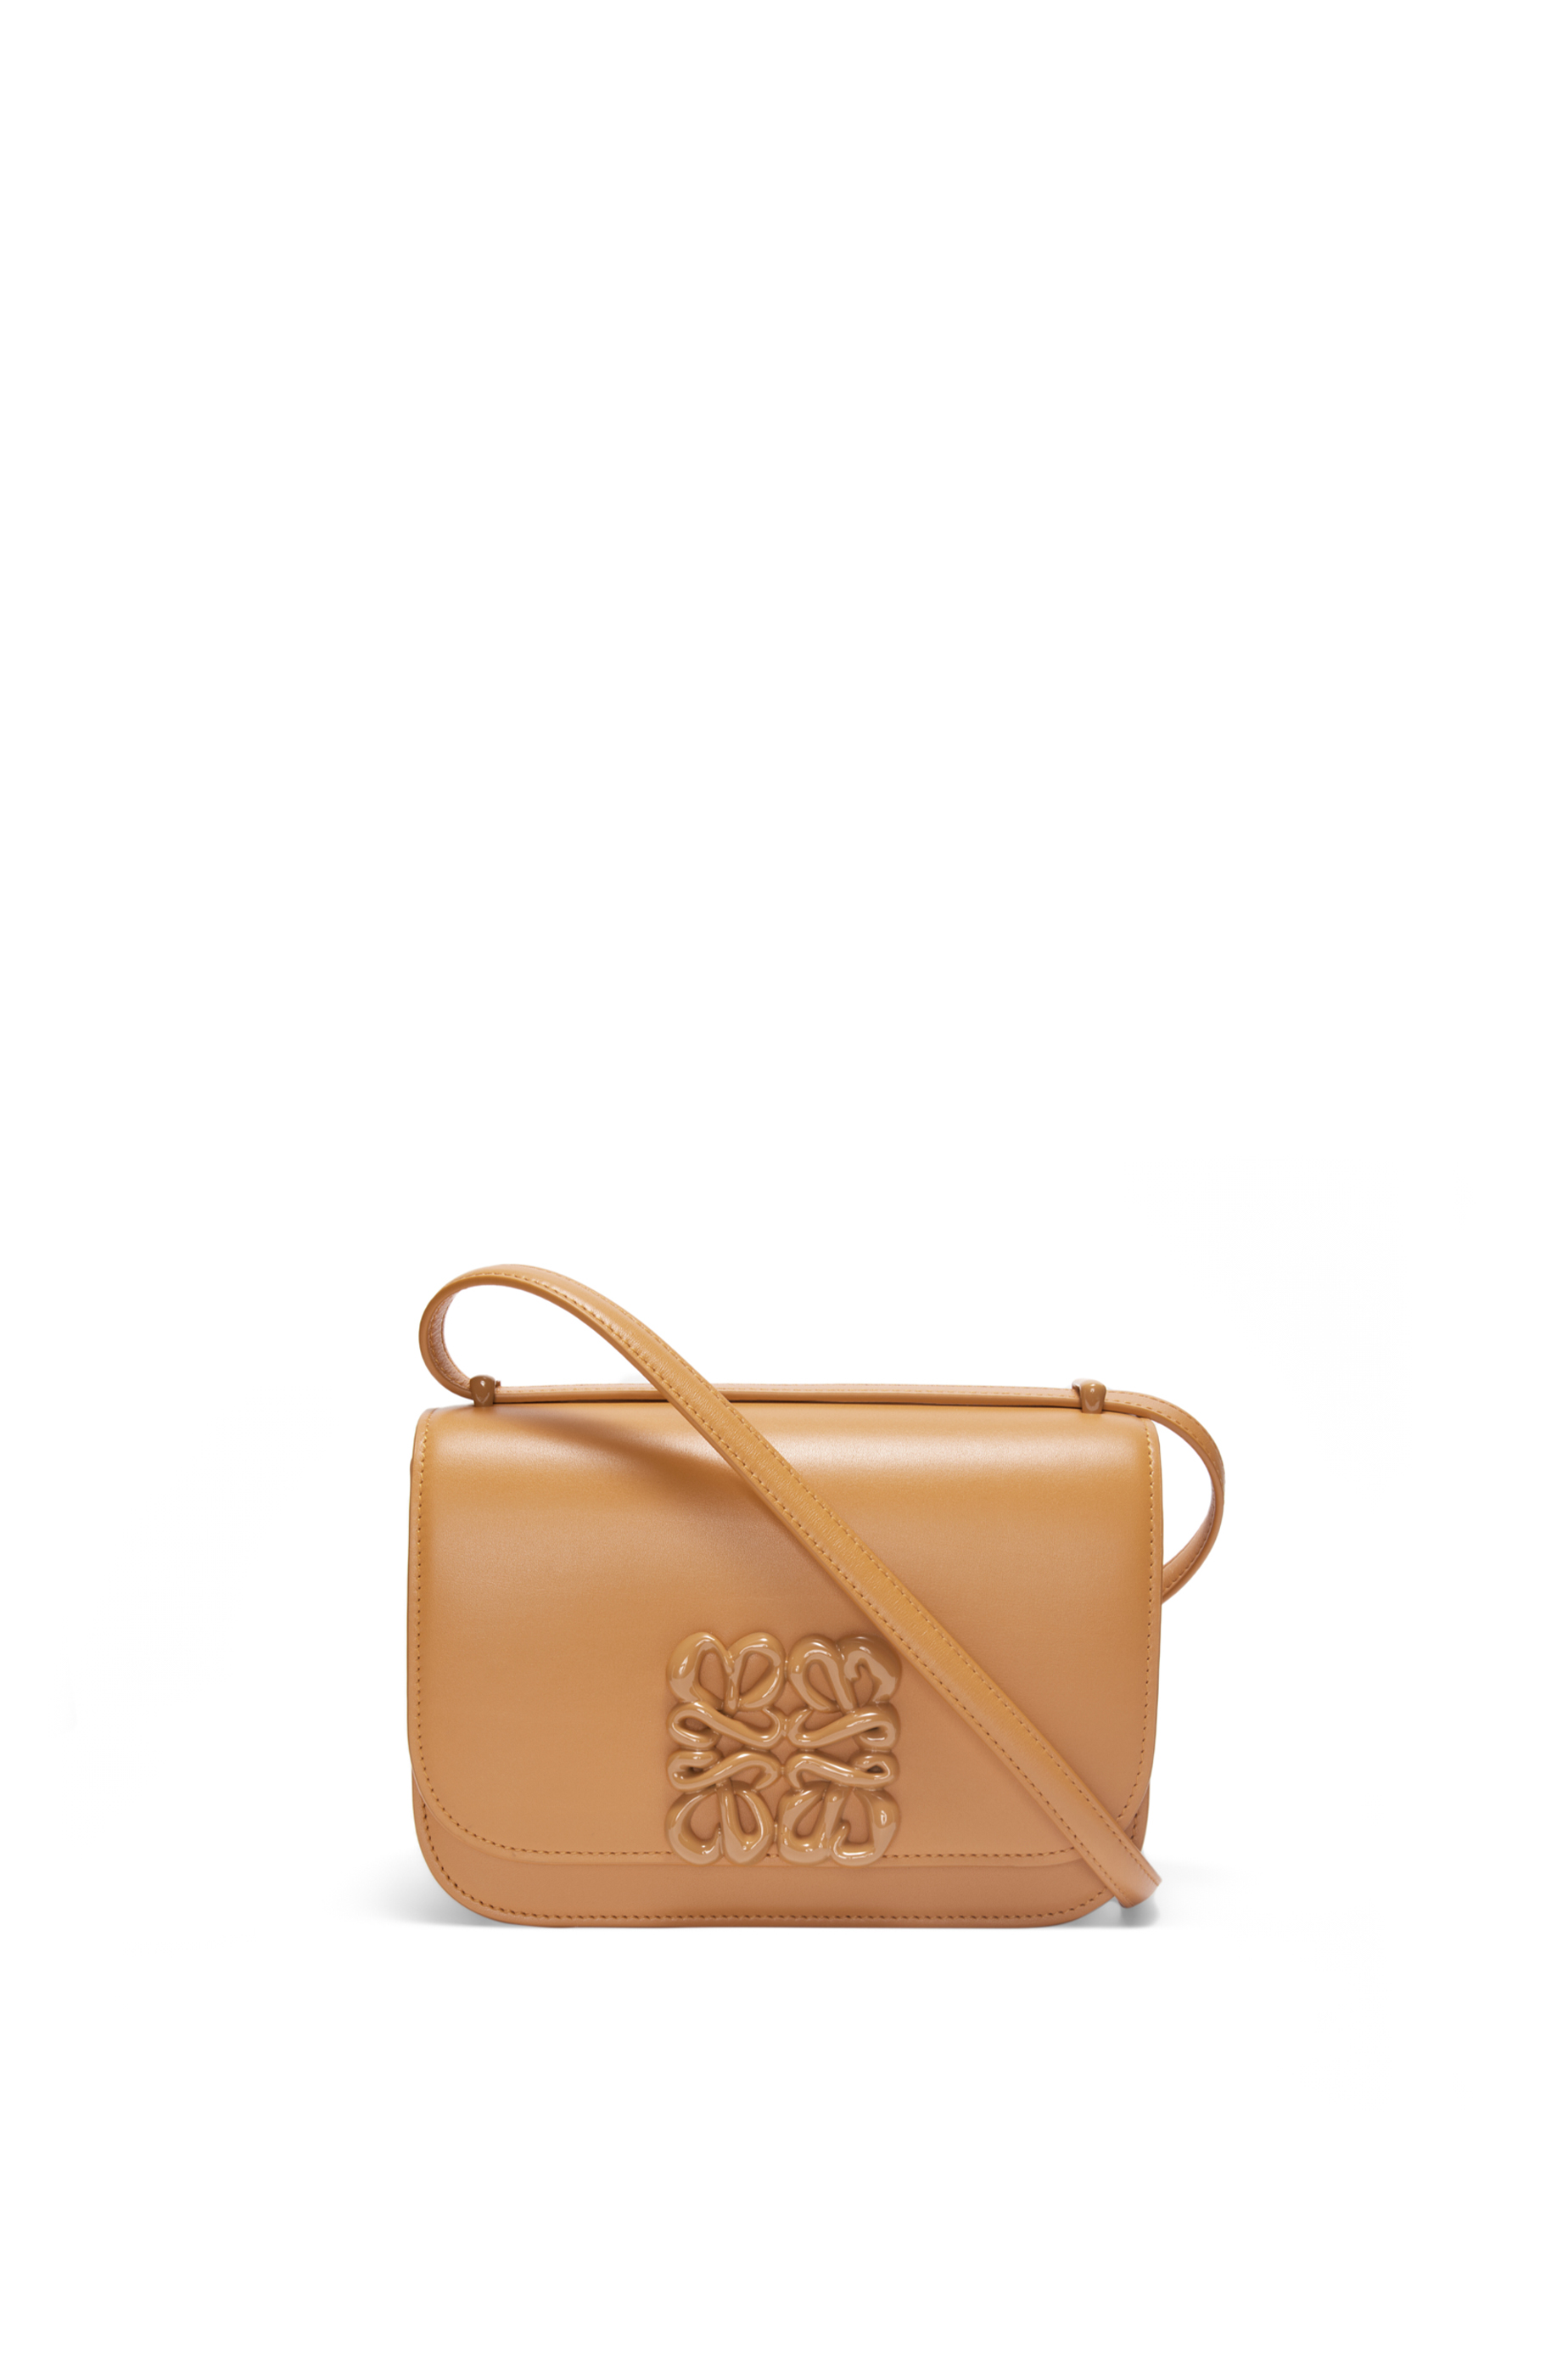 LOEWE launches new Goya statement bags in smooth silk calfskin and